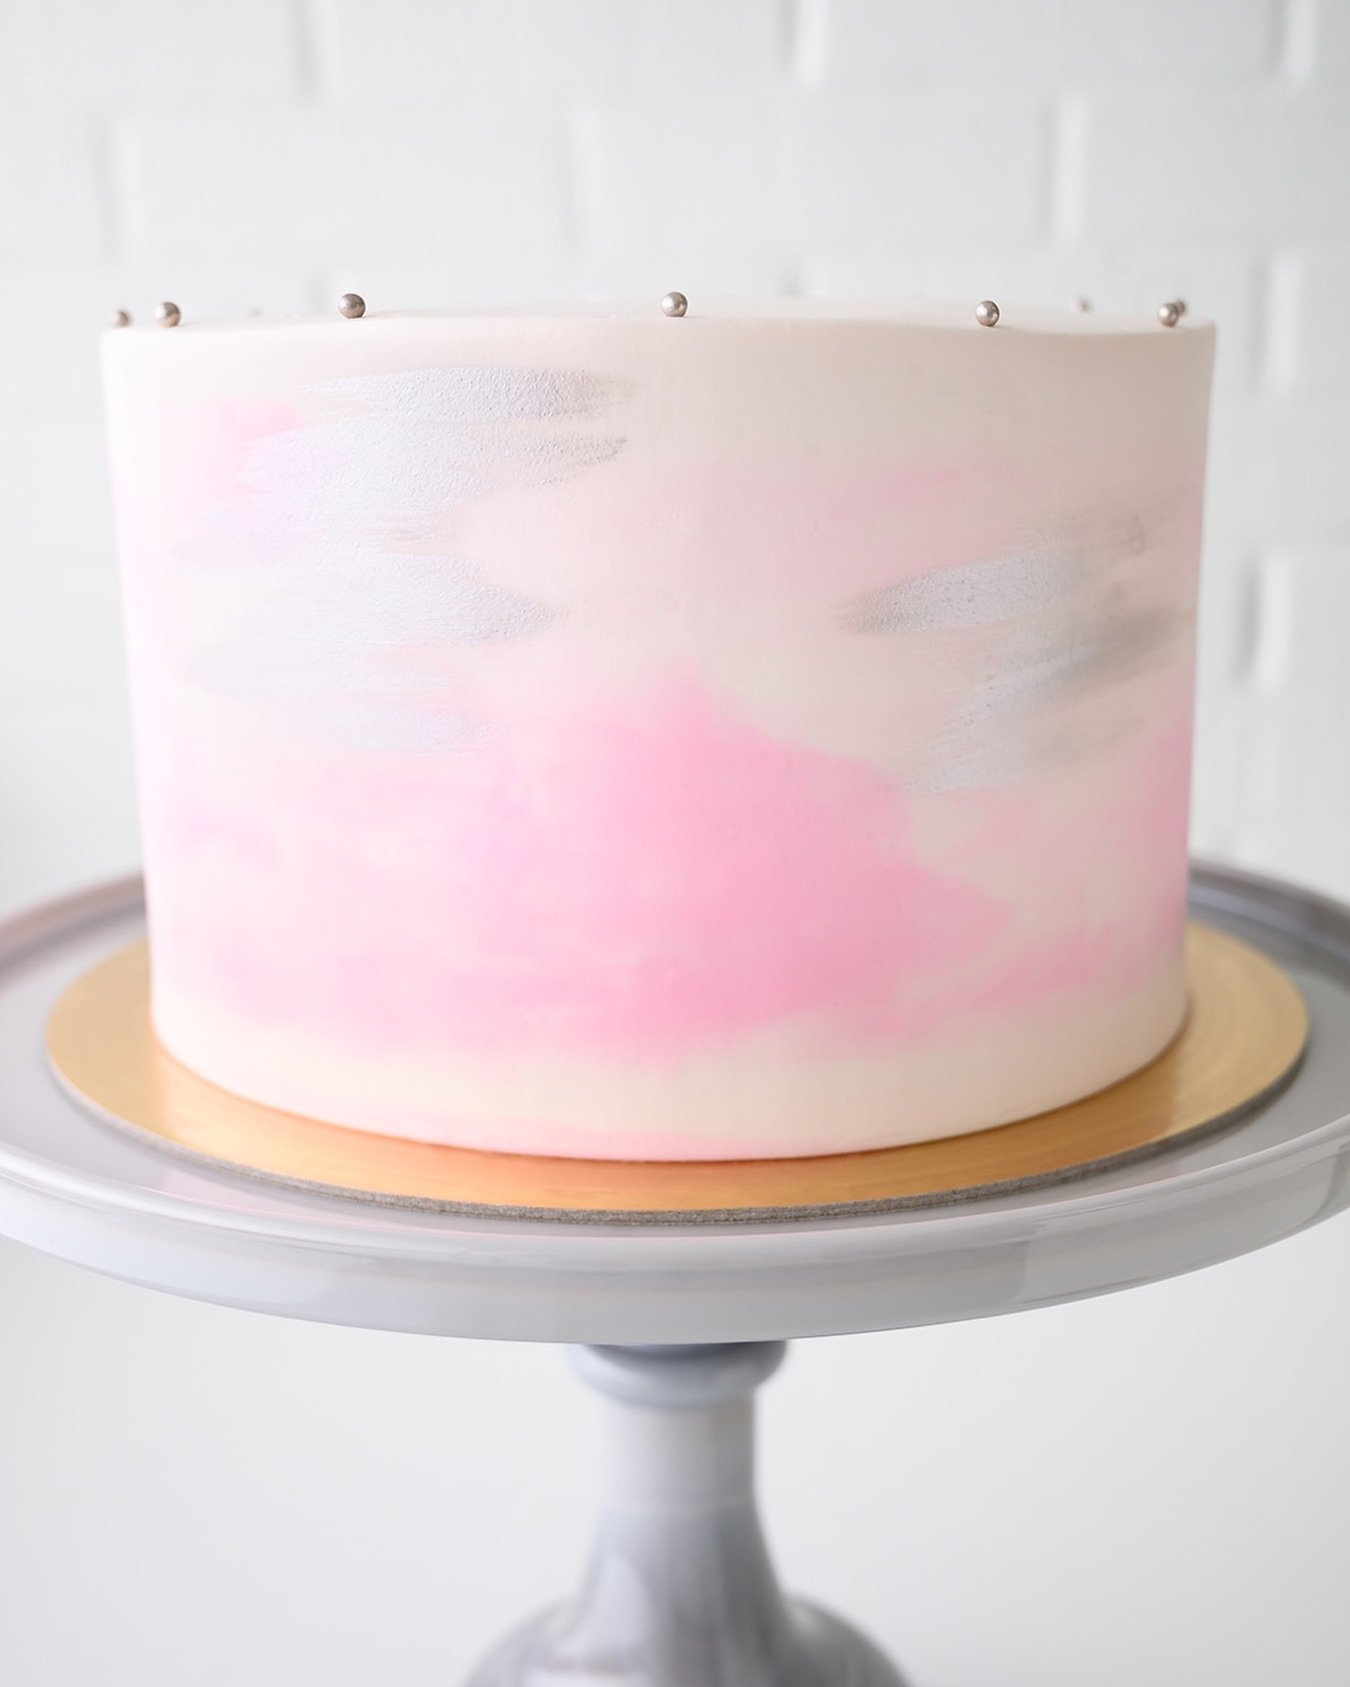 8&rdquo; Tonal Watercolor Cake in Light Pink, White, and Silver Metallic 🩷🤍🩶 Choose the size, flavor, design, and colors for your next Made-to-Order Cake at the bio link.